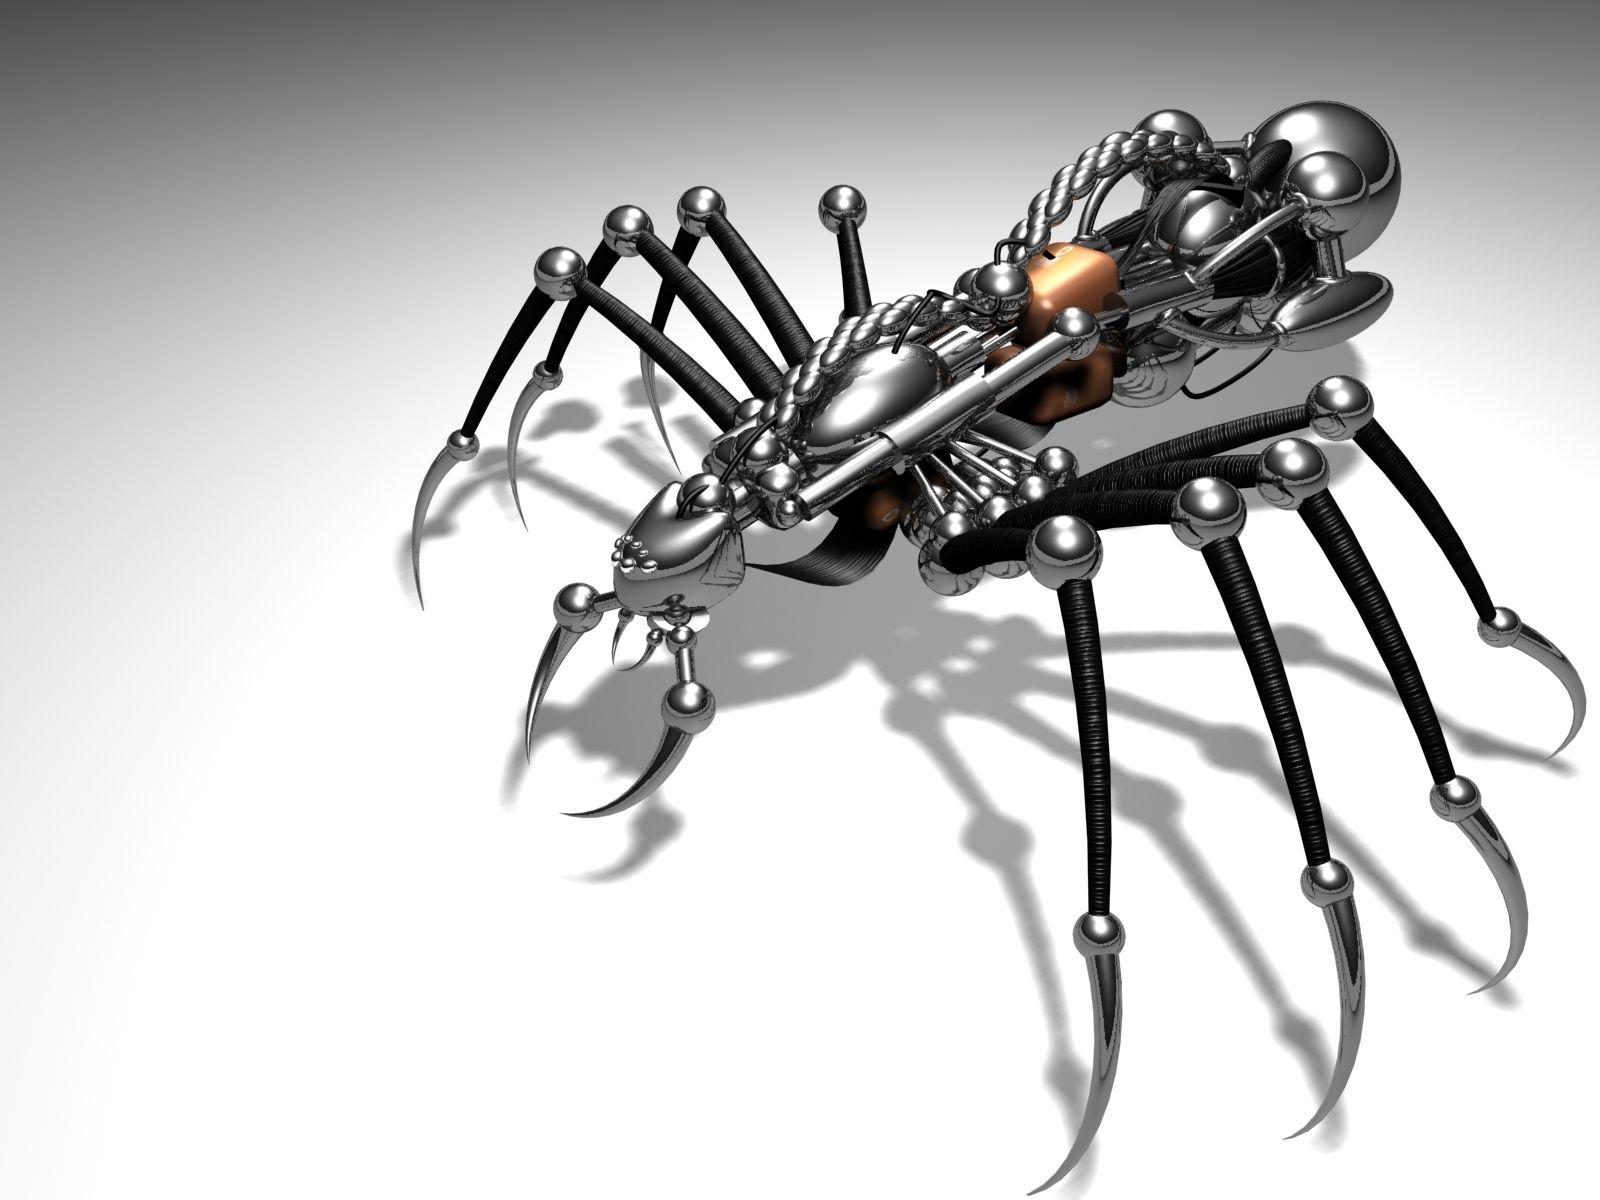 Robot Animal You Are Viewing The Robots Named Desk Spider It Has